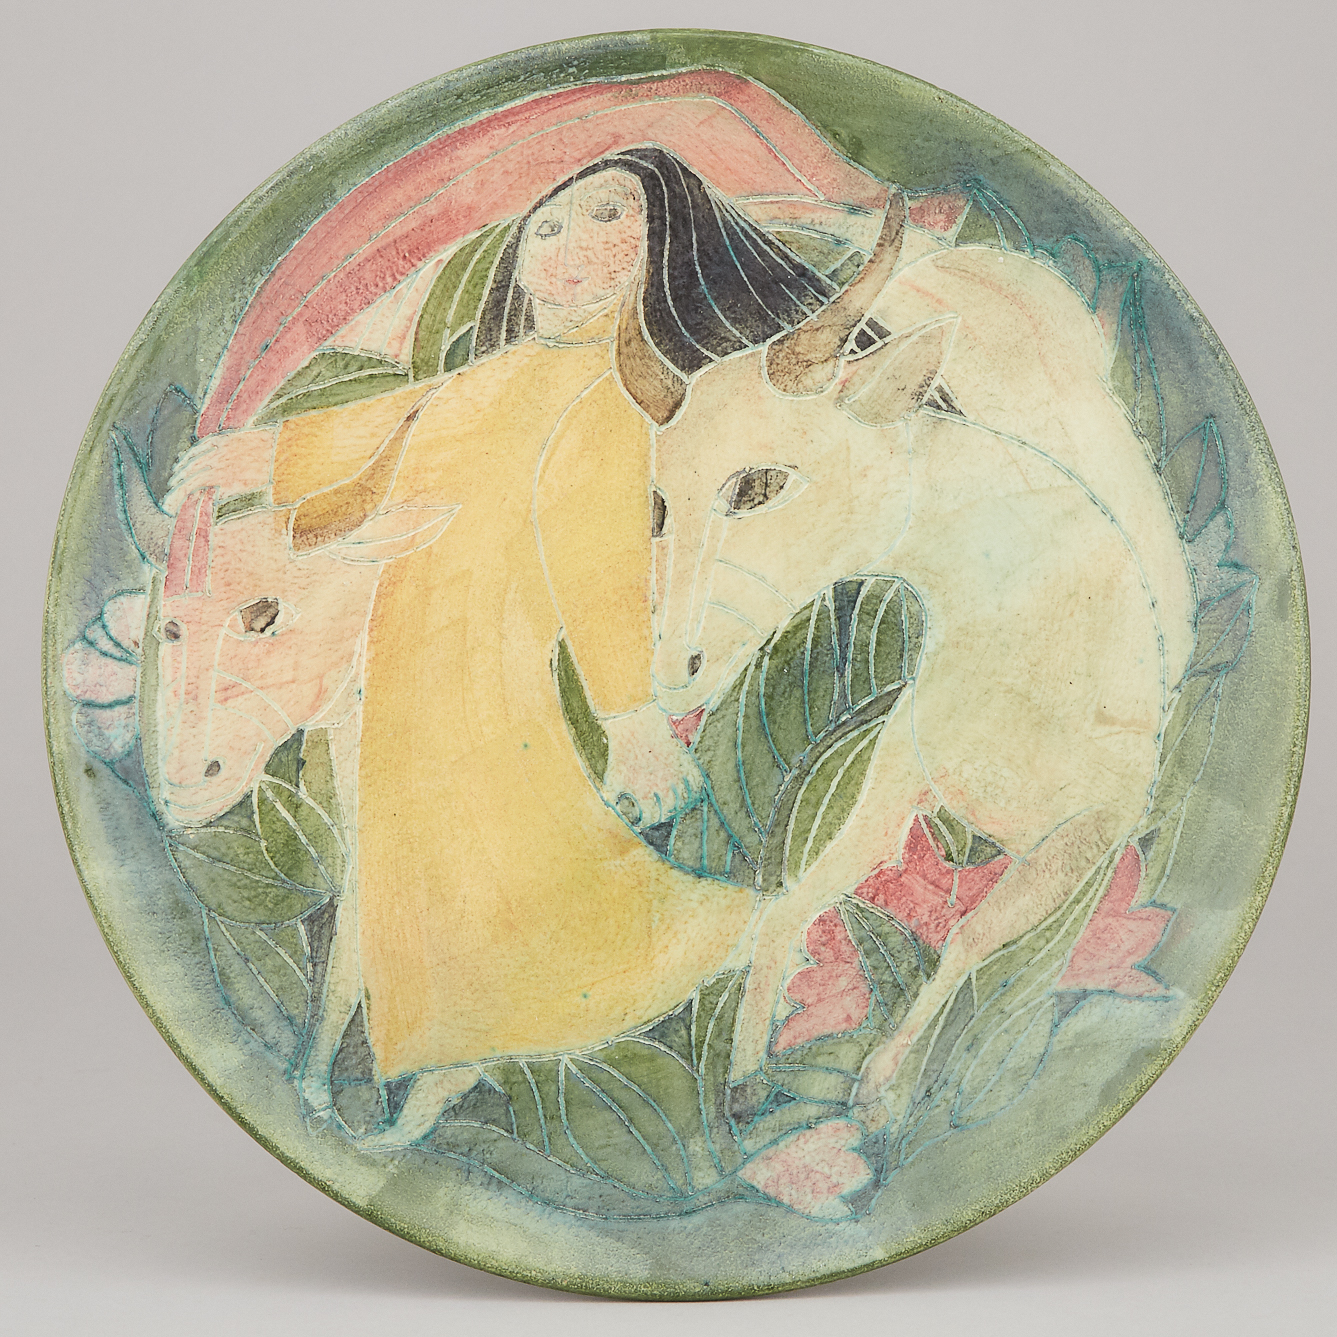 Brooklin Pottery Plate, Theo and Susan Harlander, c.1970